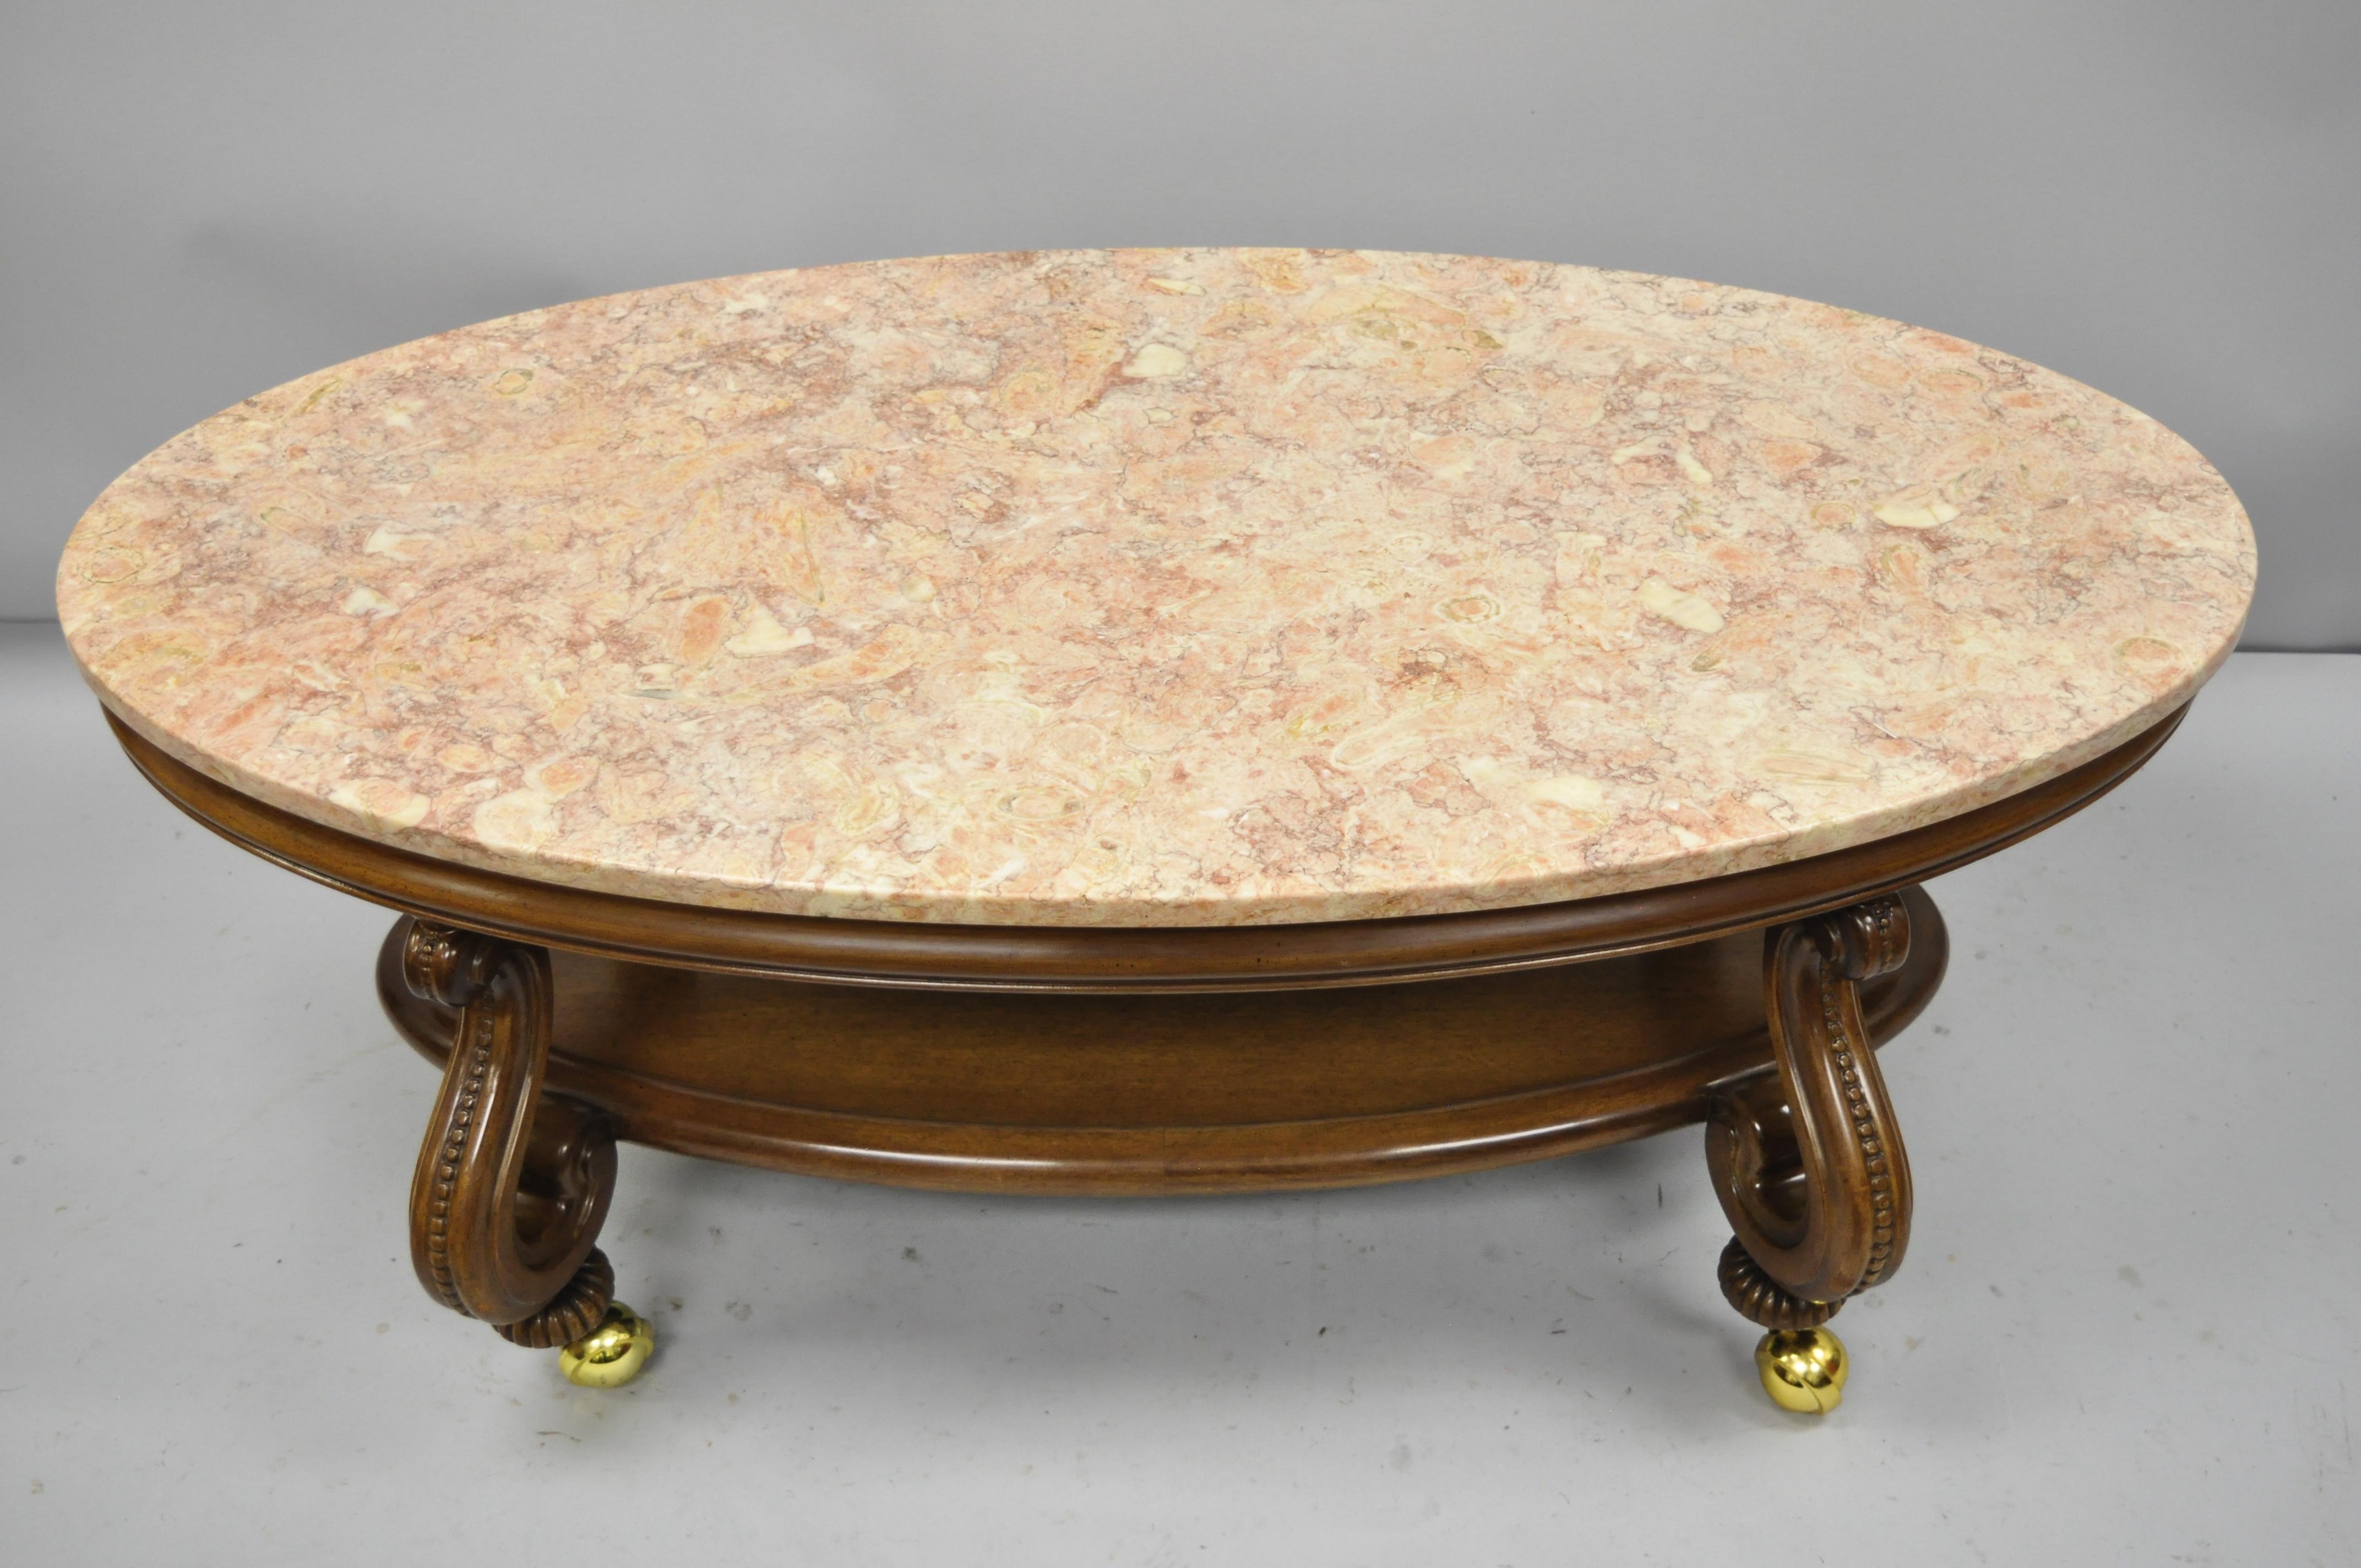 Vintage Hollywood Regency French style pink marble-top oval coffee table. Item features solid mahogany base, lower shelf, rolling casters, pink marble top, nicely carved details, great style and form, circa 1950. Measurements: 20.5